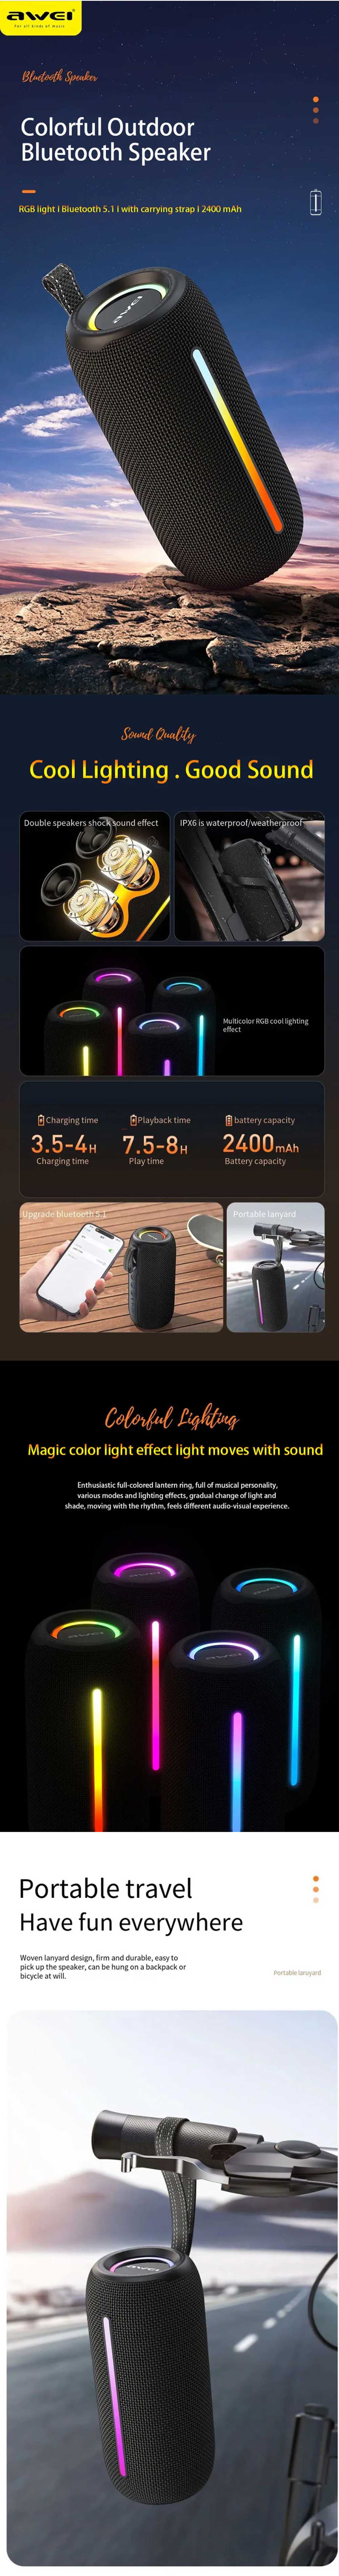 Awei Y788 Portable Outdoor Bluetooth Speaker